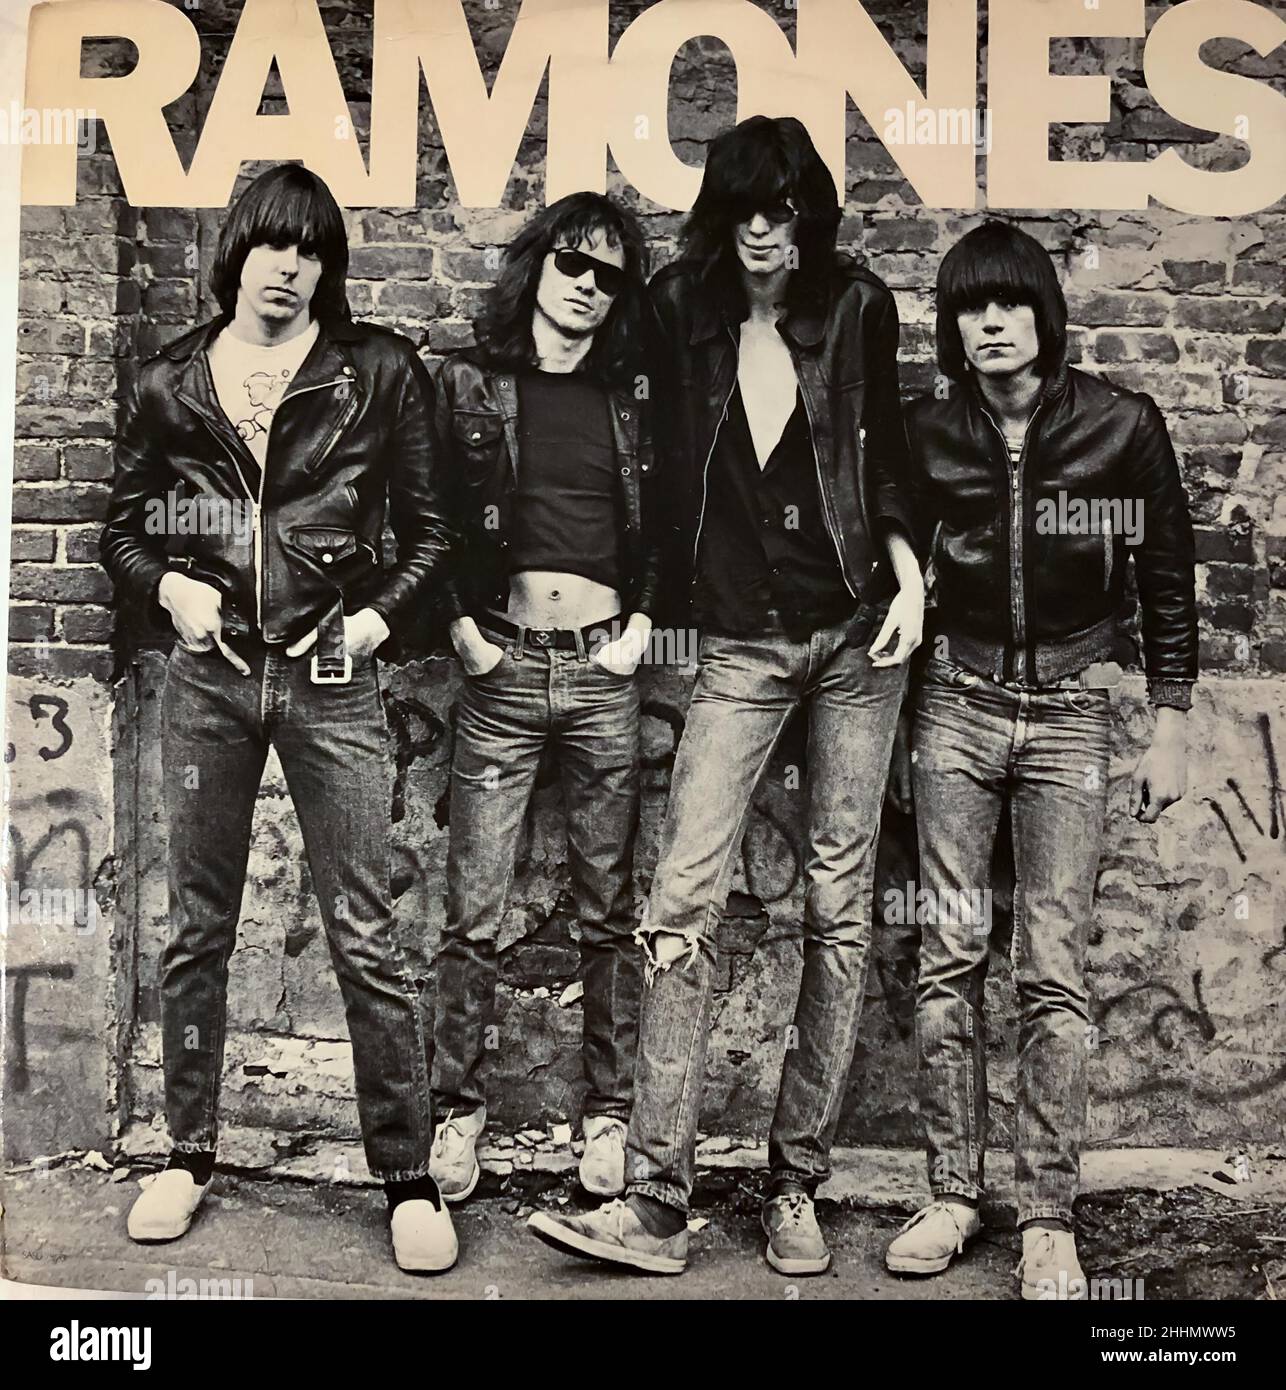 New York City, NY, USA, 'The Ramones' Punk Rock Band Record Collection, 1970s Music Collection, Sire Records, 1976, rock album cover, classic rock vinyl albums, vintage covers Stock Photo